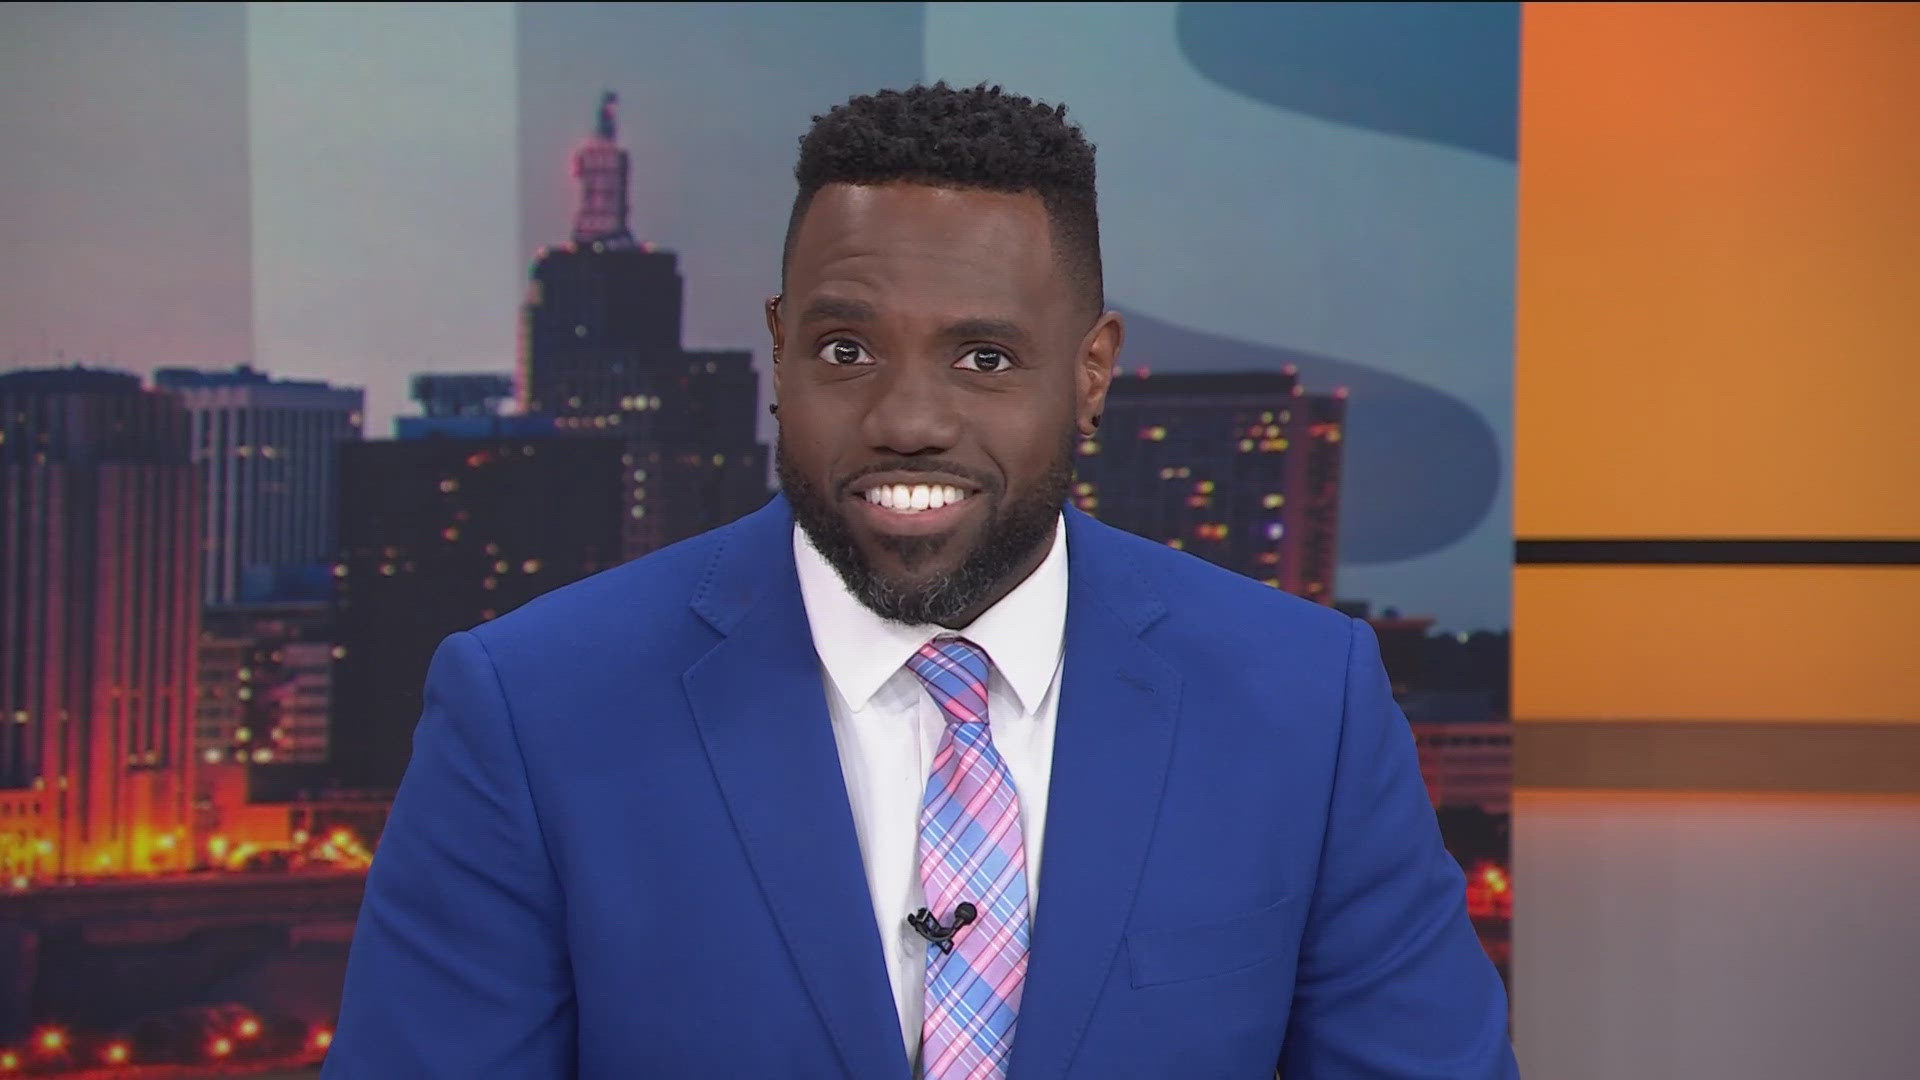 KARE 11 Sunrise anchor Jason Hackett is starring on the cover of Lavender magazine as he shares his journey as a Black gay man in the news industry.